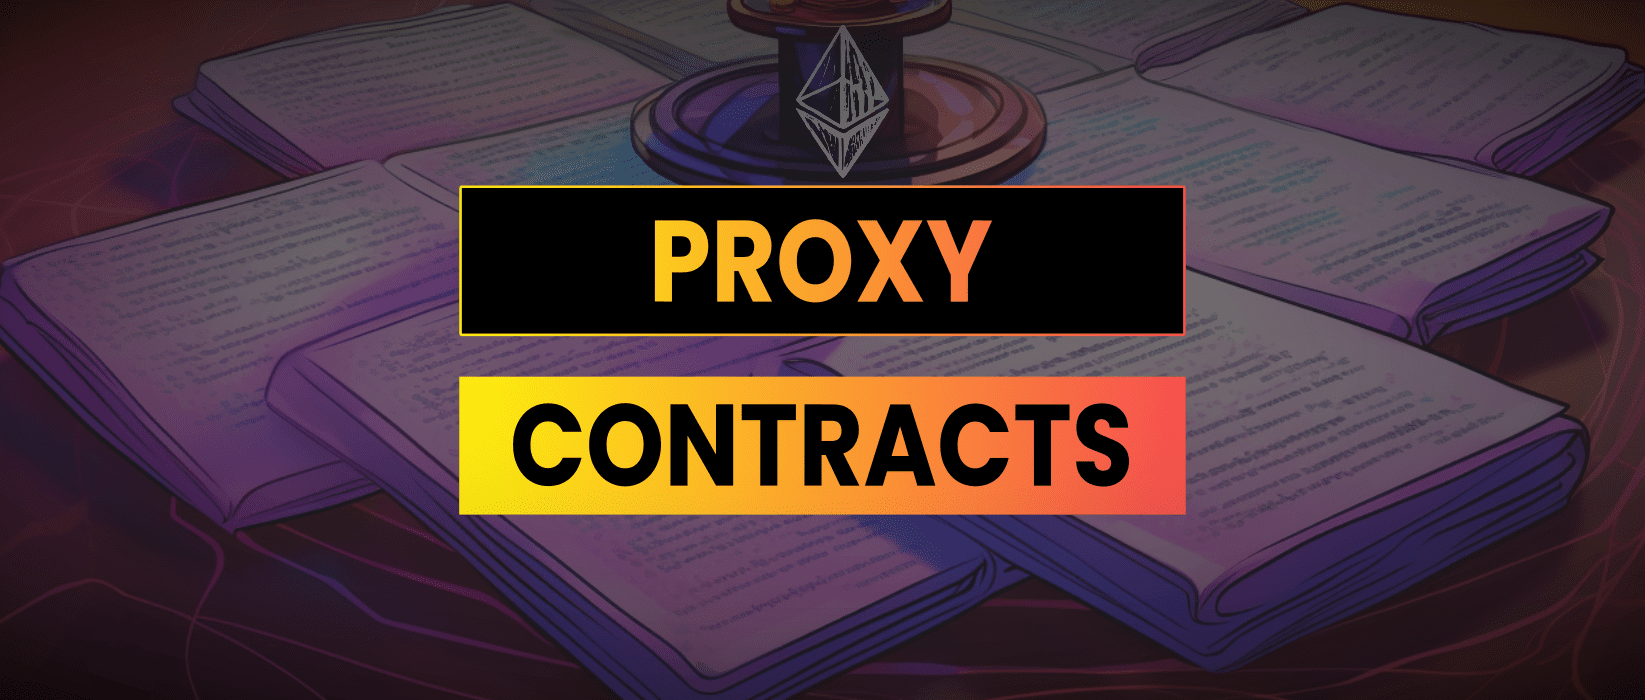 Proxy Contracts Tutorial